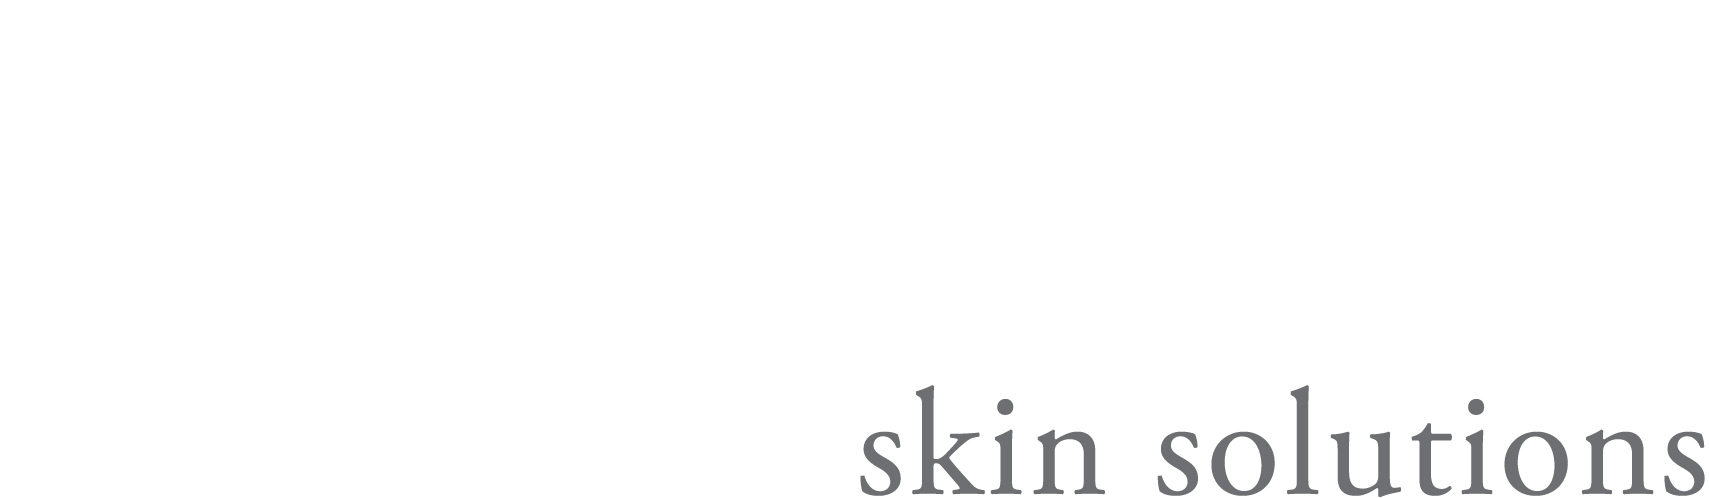 SURFACE skin solutions